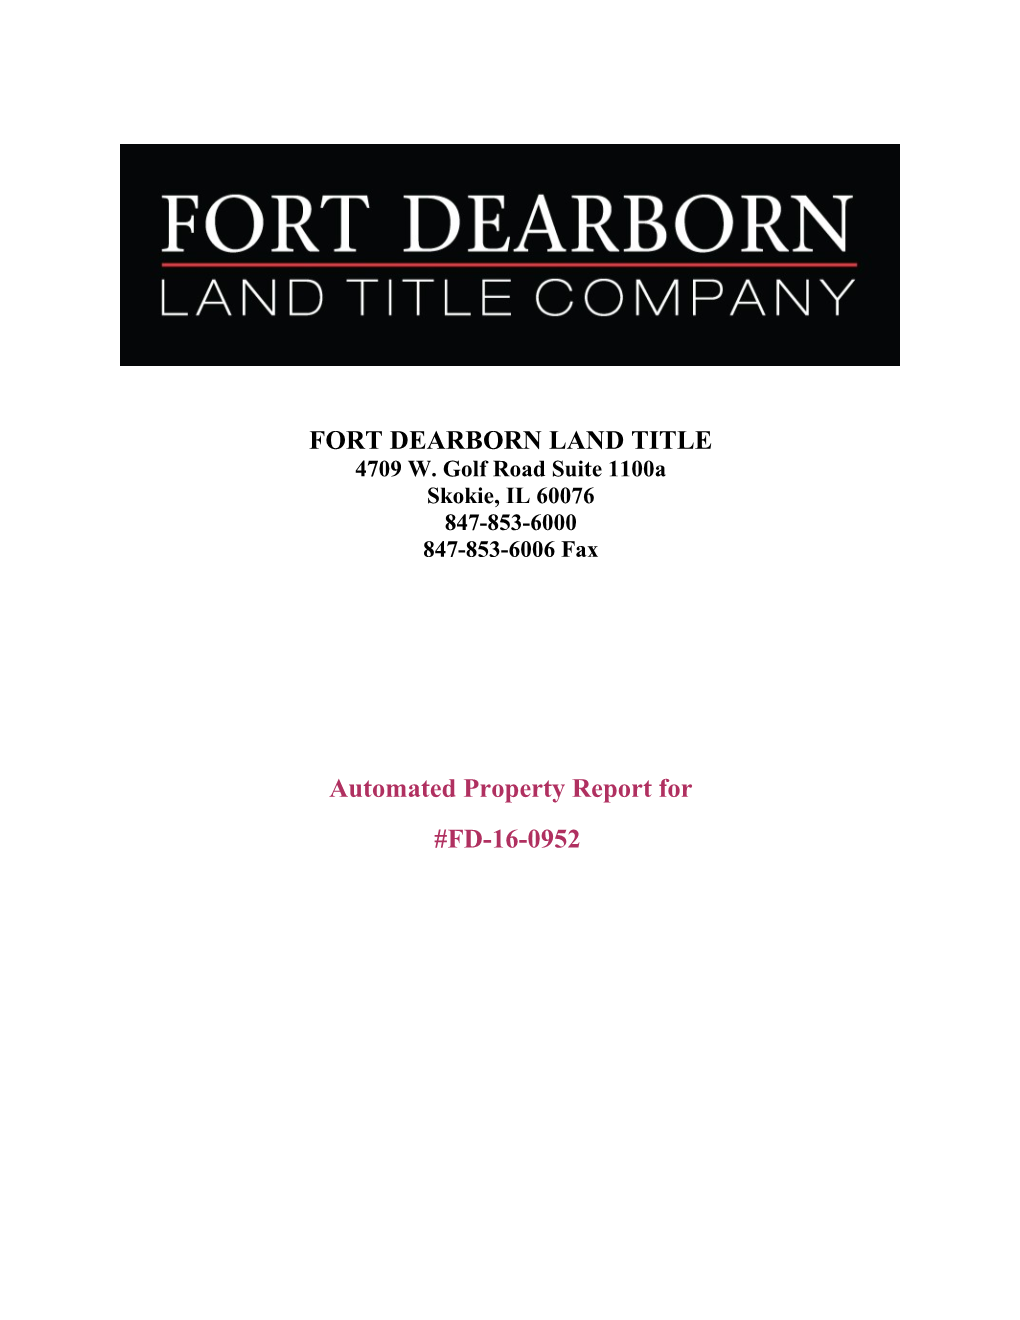 Fort Dearborn Land Title